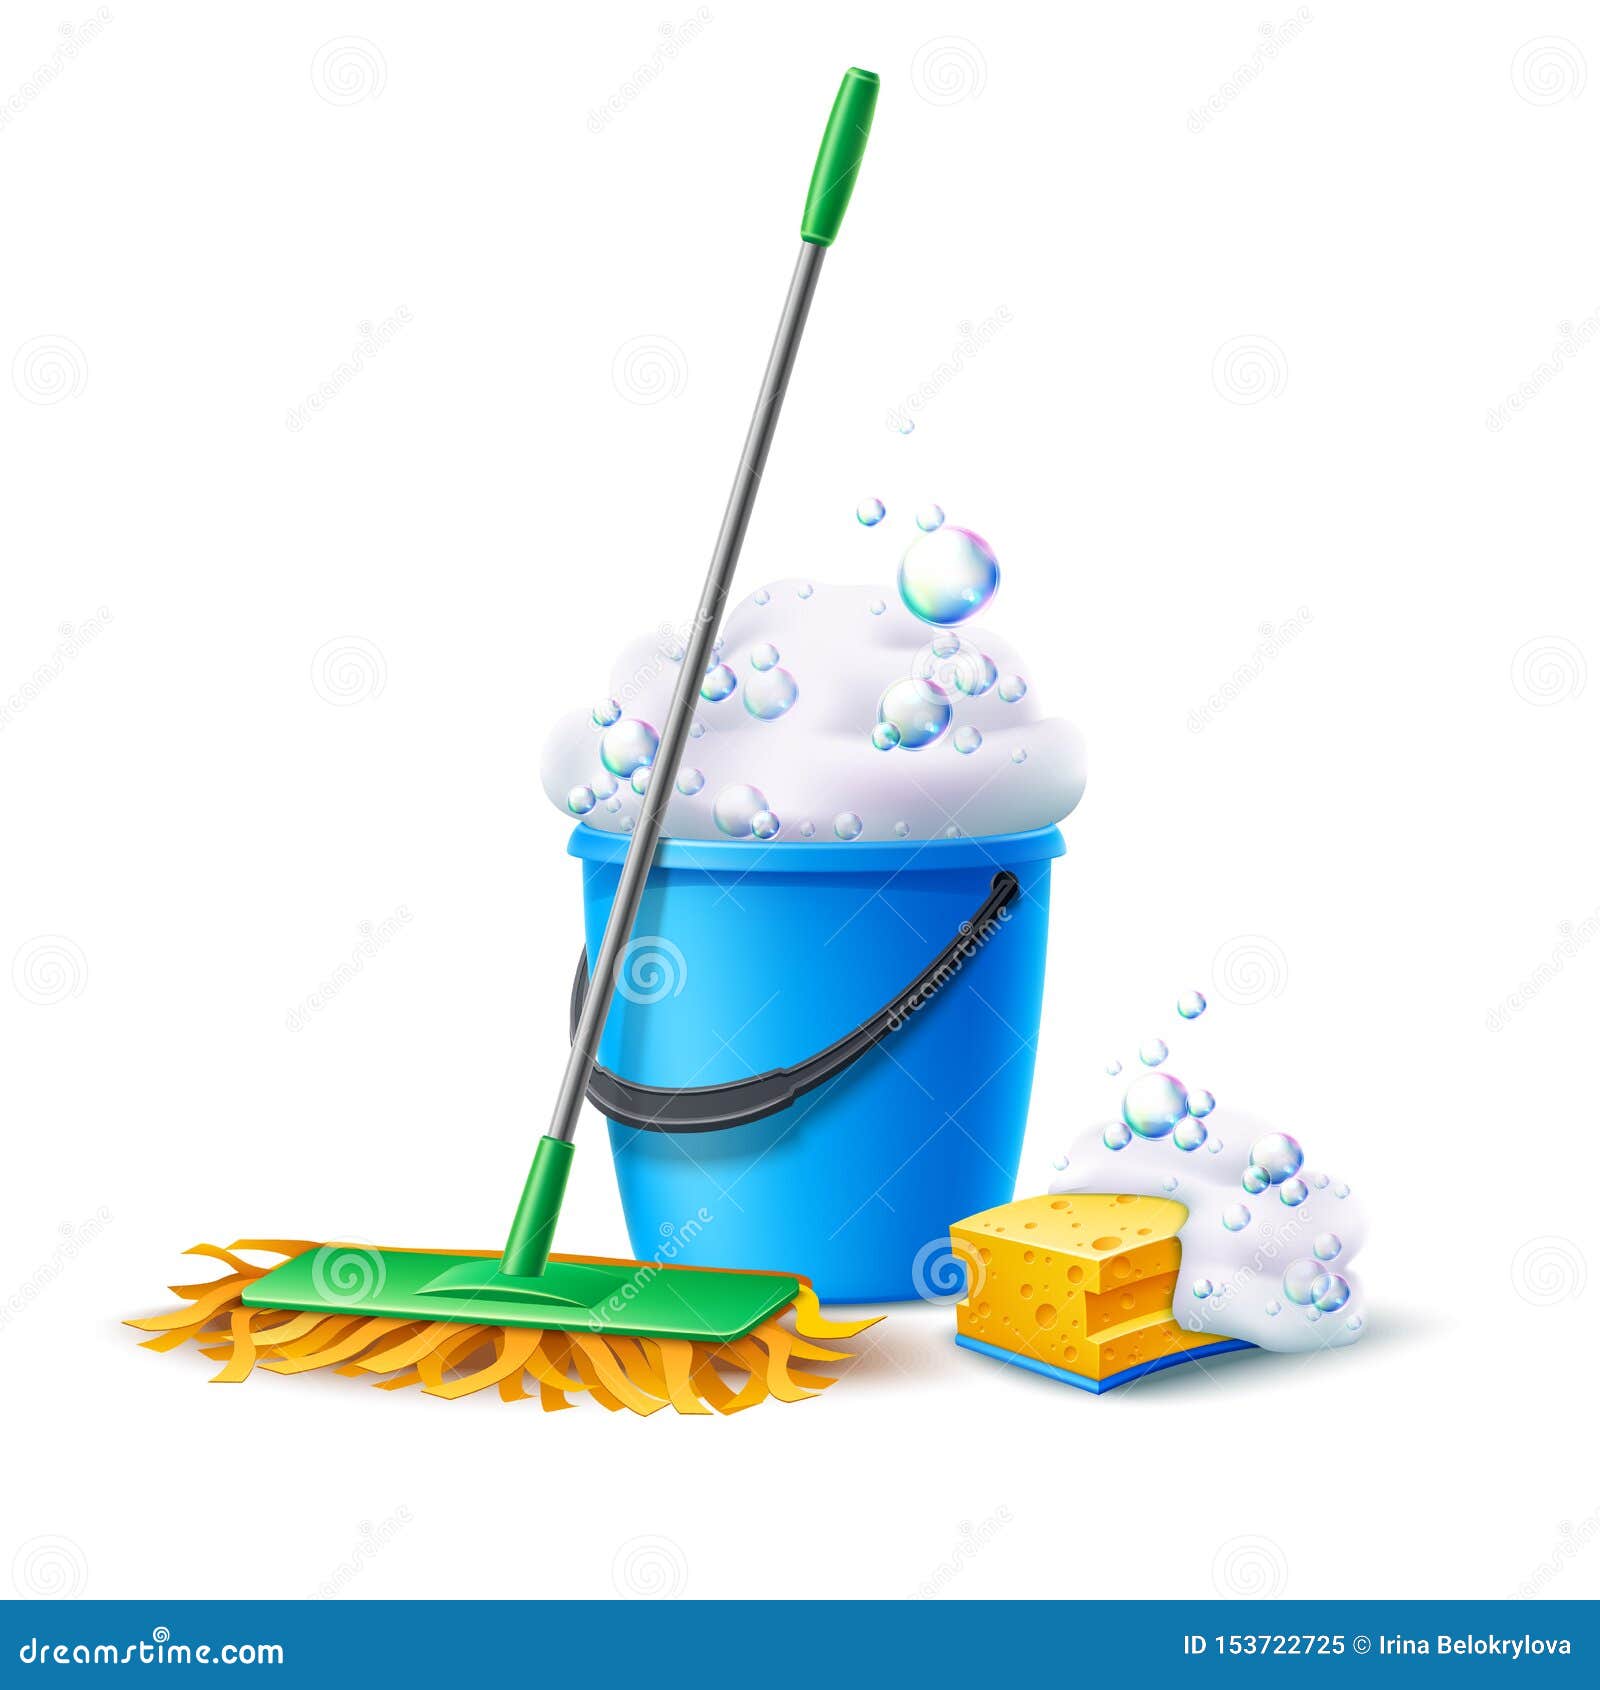 Mop Cartoons, Illustrations & Vector Stock Images - 20882 Pictures to